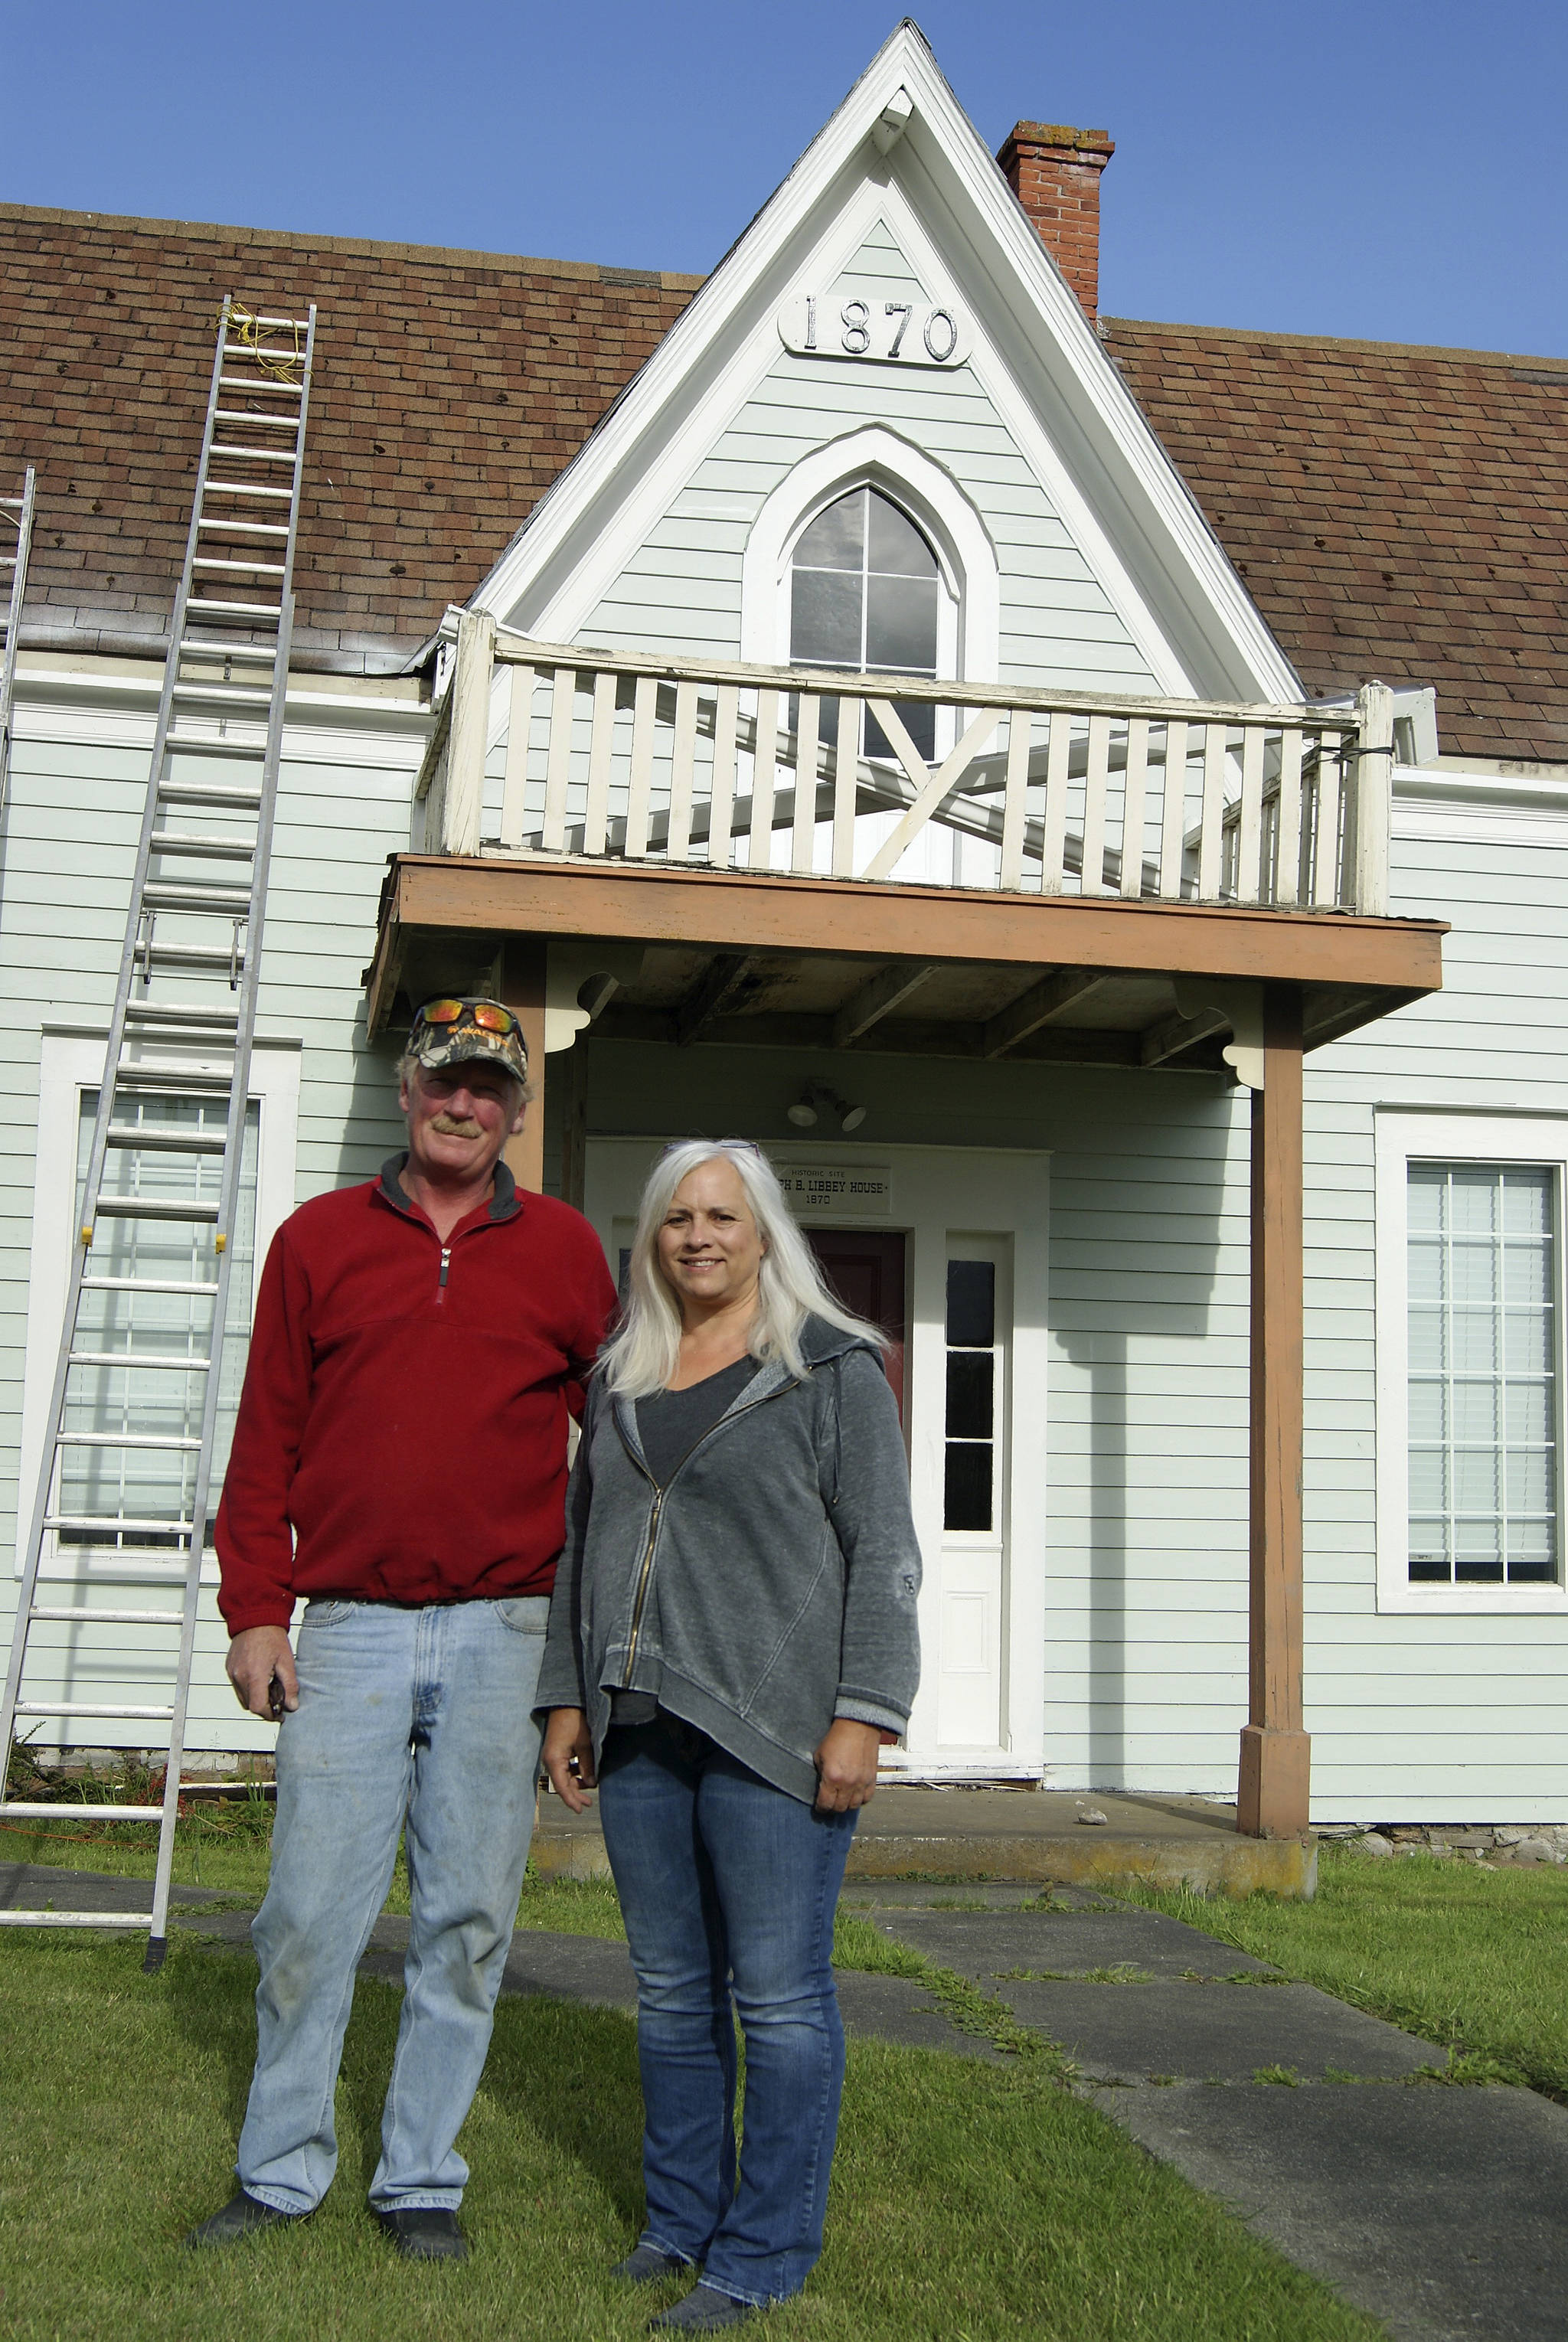 Dennis McCaslin and Cindy Balthazar stand in front of the Joseph B. Libbey House, a historic structure built in 1870 that new owner McCaslin is working to restore. “We’re going to save it,” he said.